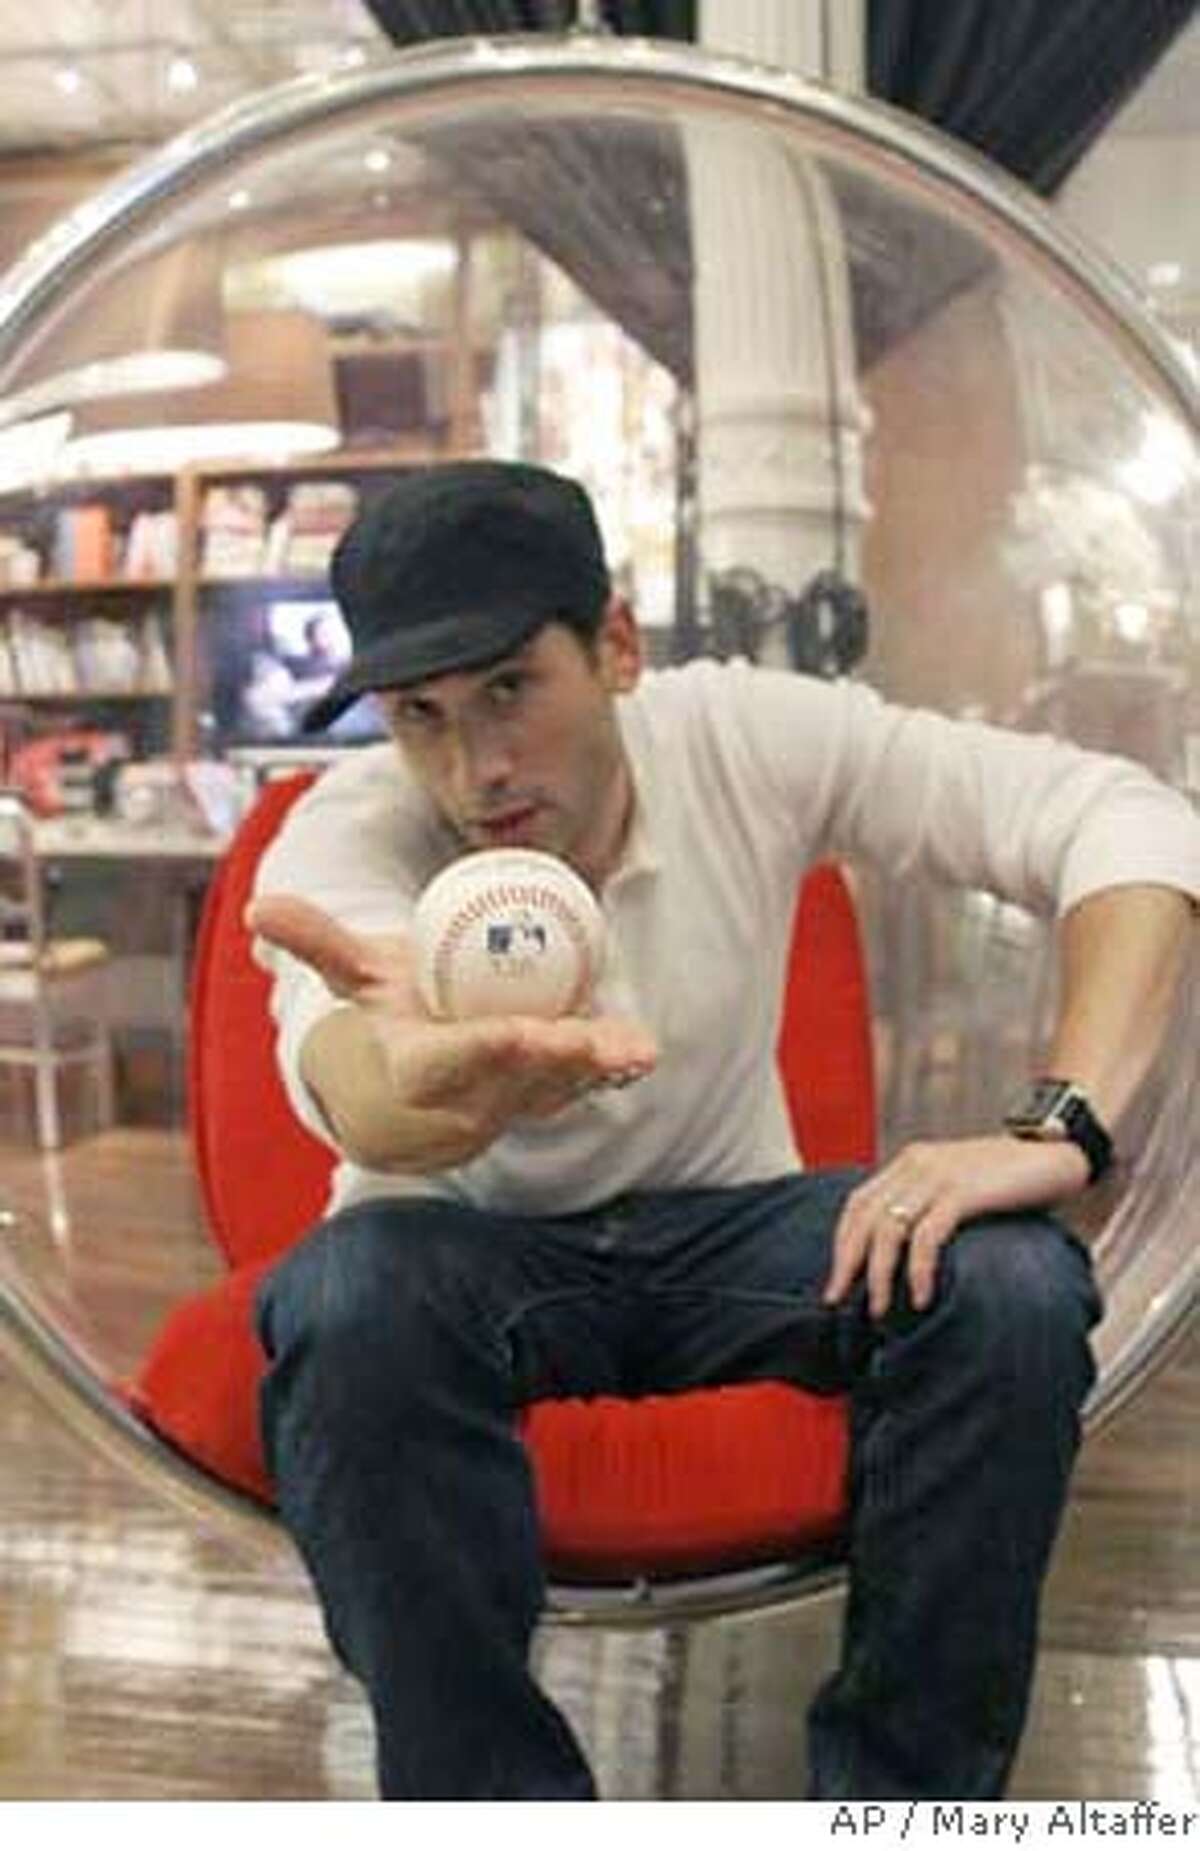 Fashion designer Marc Ecko poses with Barry Bonds' record-breaking home run ball Monday, Sept. 17, 2007, in New York. Ecko was the winning bidder in the online auction for the ball from Bonds' 756th career home run, and has announced that it is now in the public's hands. Ecko announced Monday he was taking votes on whether to give the ball to the Hall of Fame, brand it with an asterisk or blast it into space. (AP Photo/Mary Altaffer)